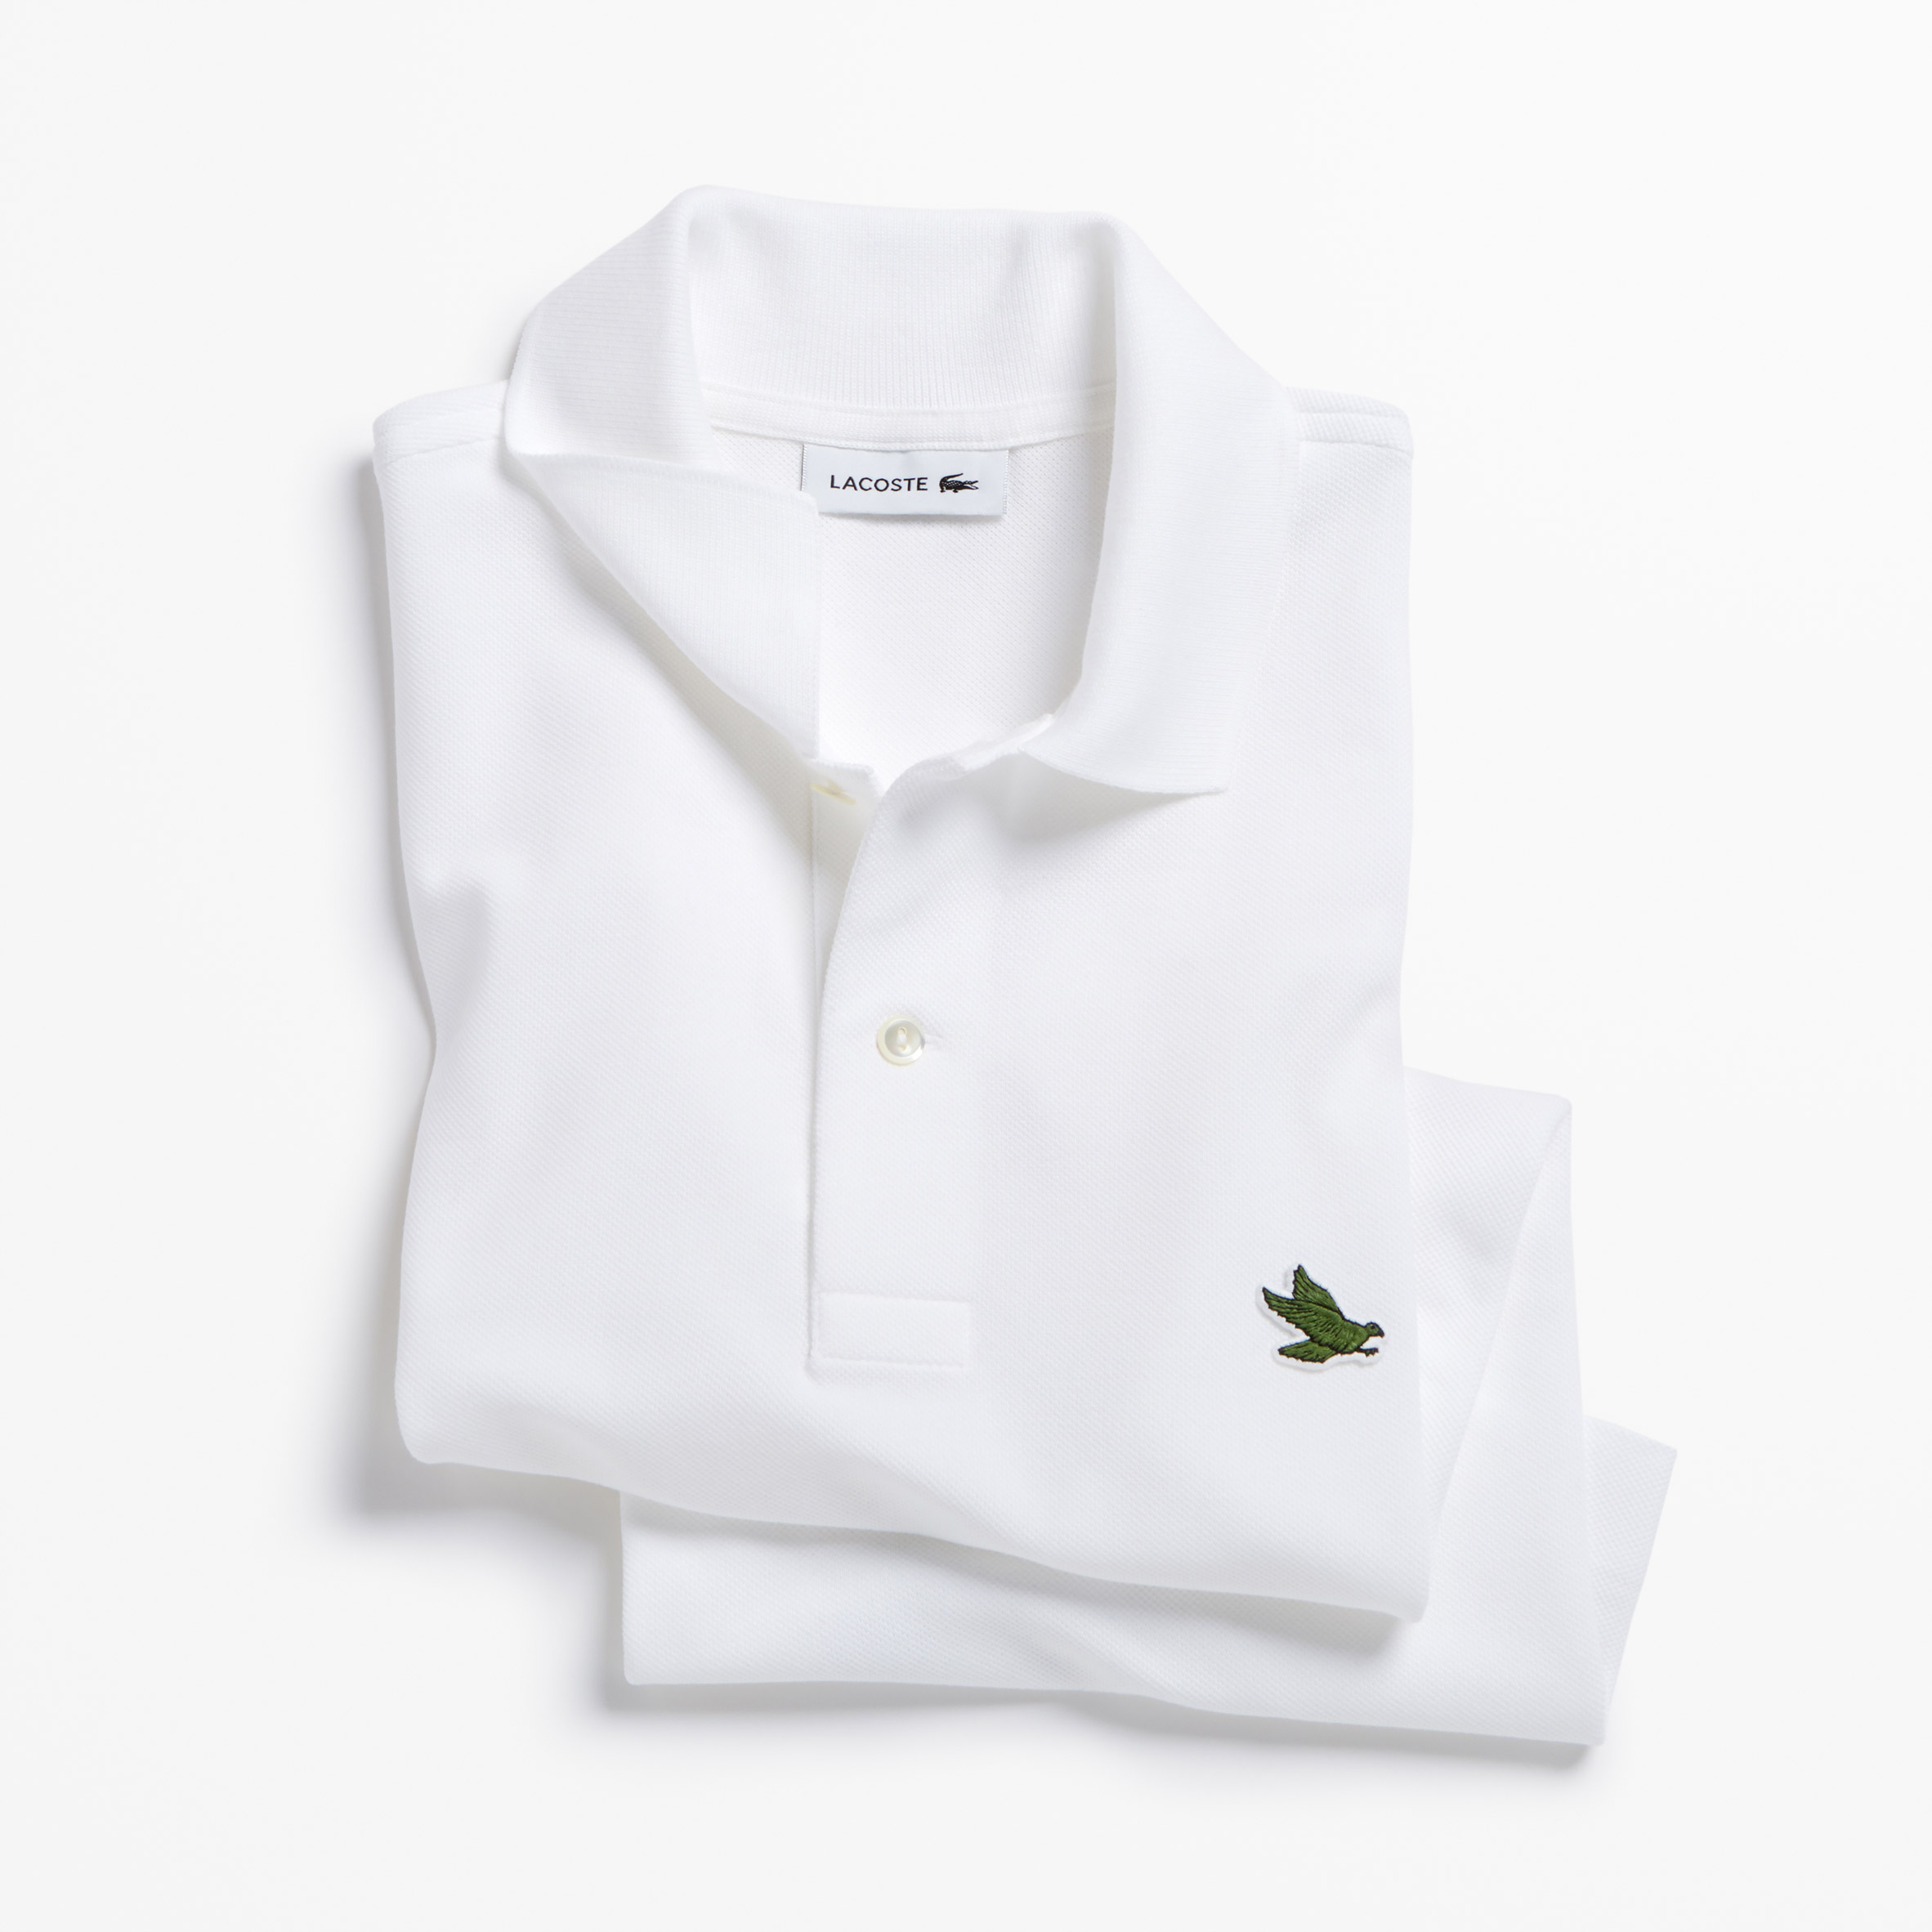 Ni systematisk Harmoni Lacoste crocodile logo replaced by endangered species